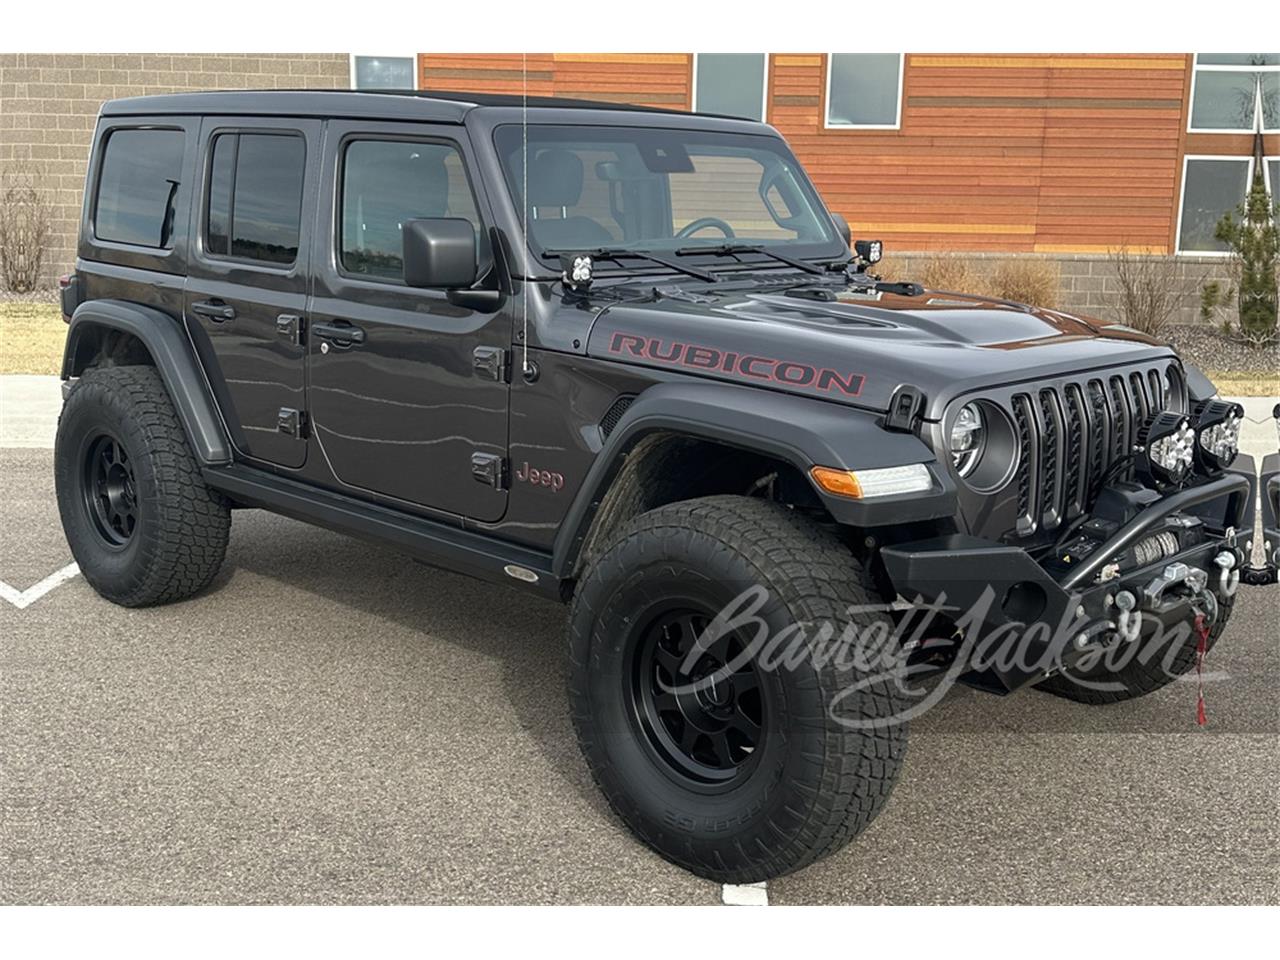 For Sale at Auction: 2021 Jeep Wrangler Rubicon in Scottsdale, Arizona for sale in Scottsdale, AZ